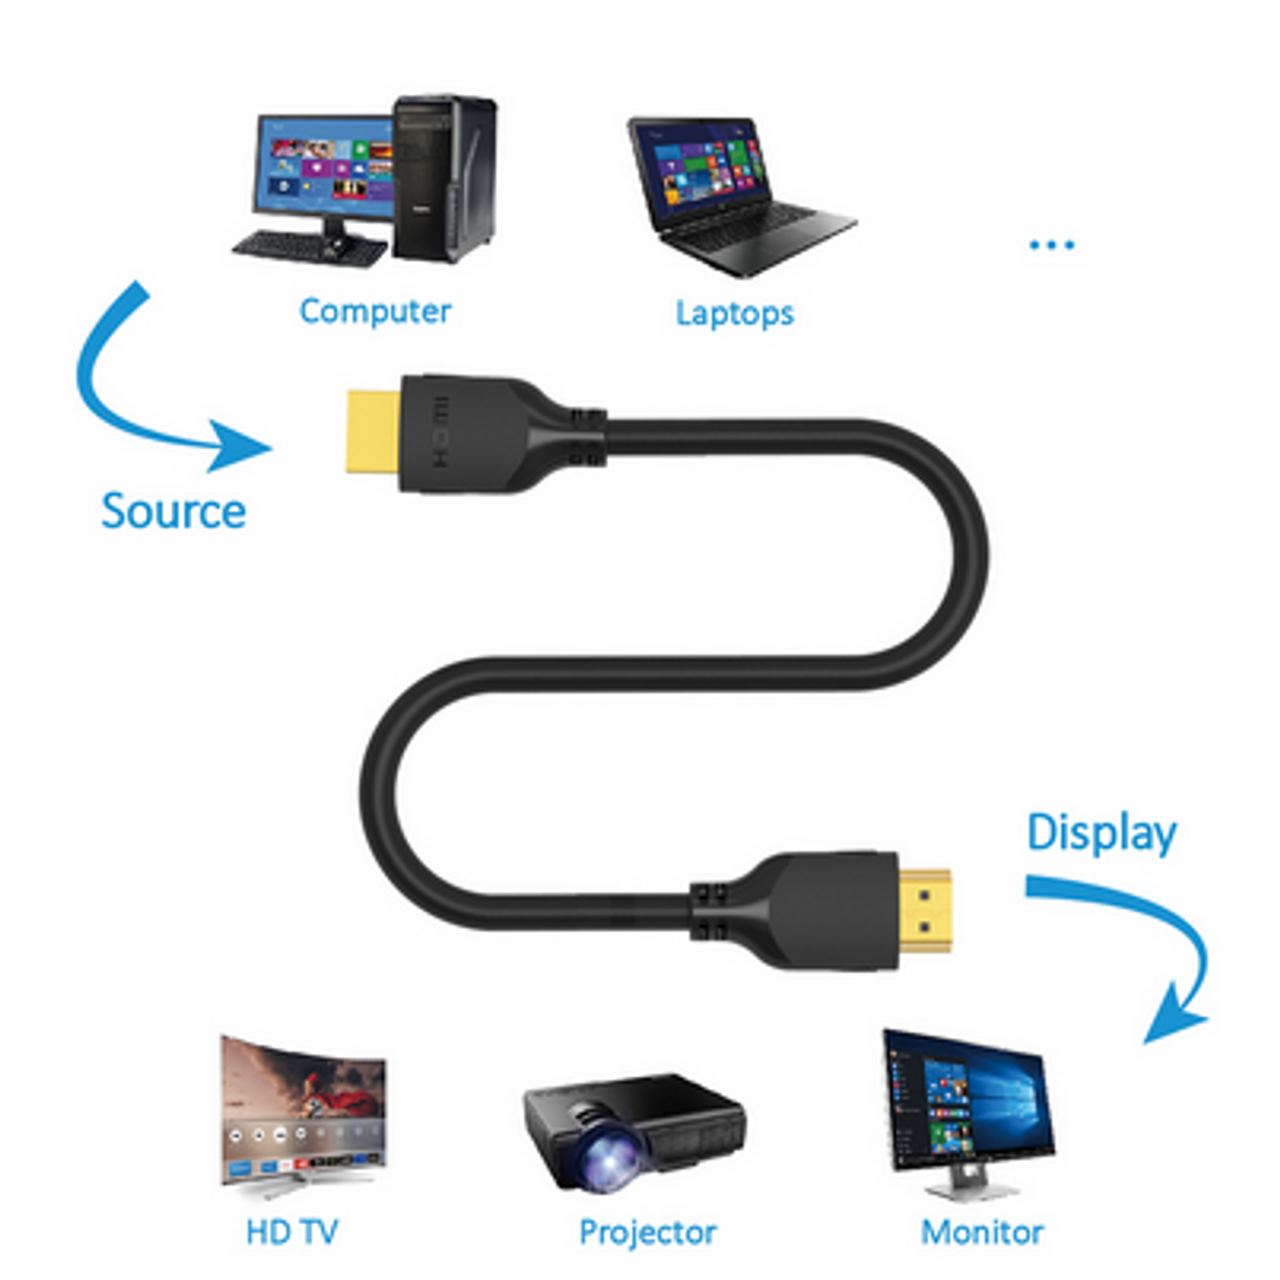 15 ft. HDMI to HDMI Cable